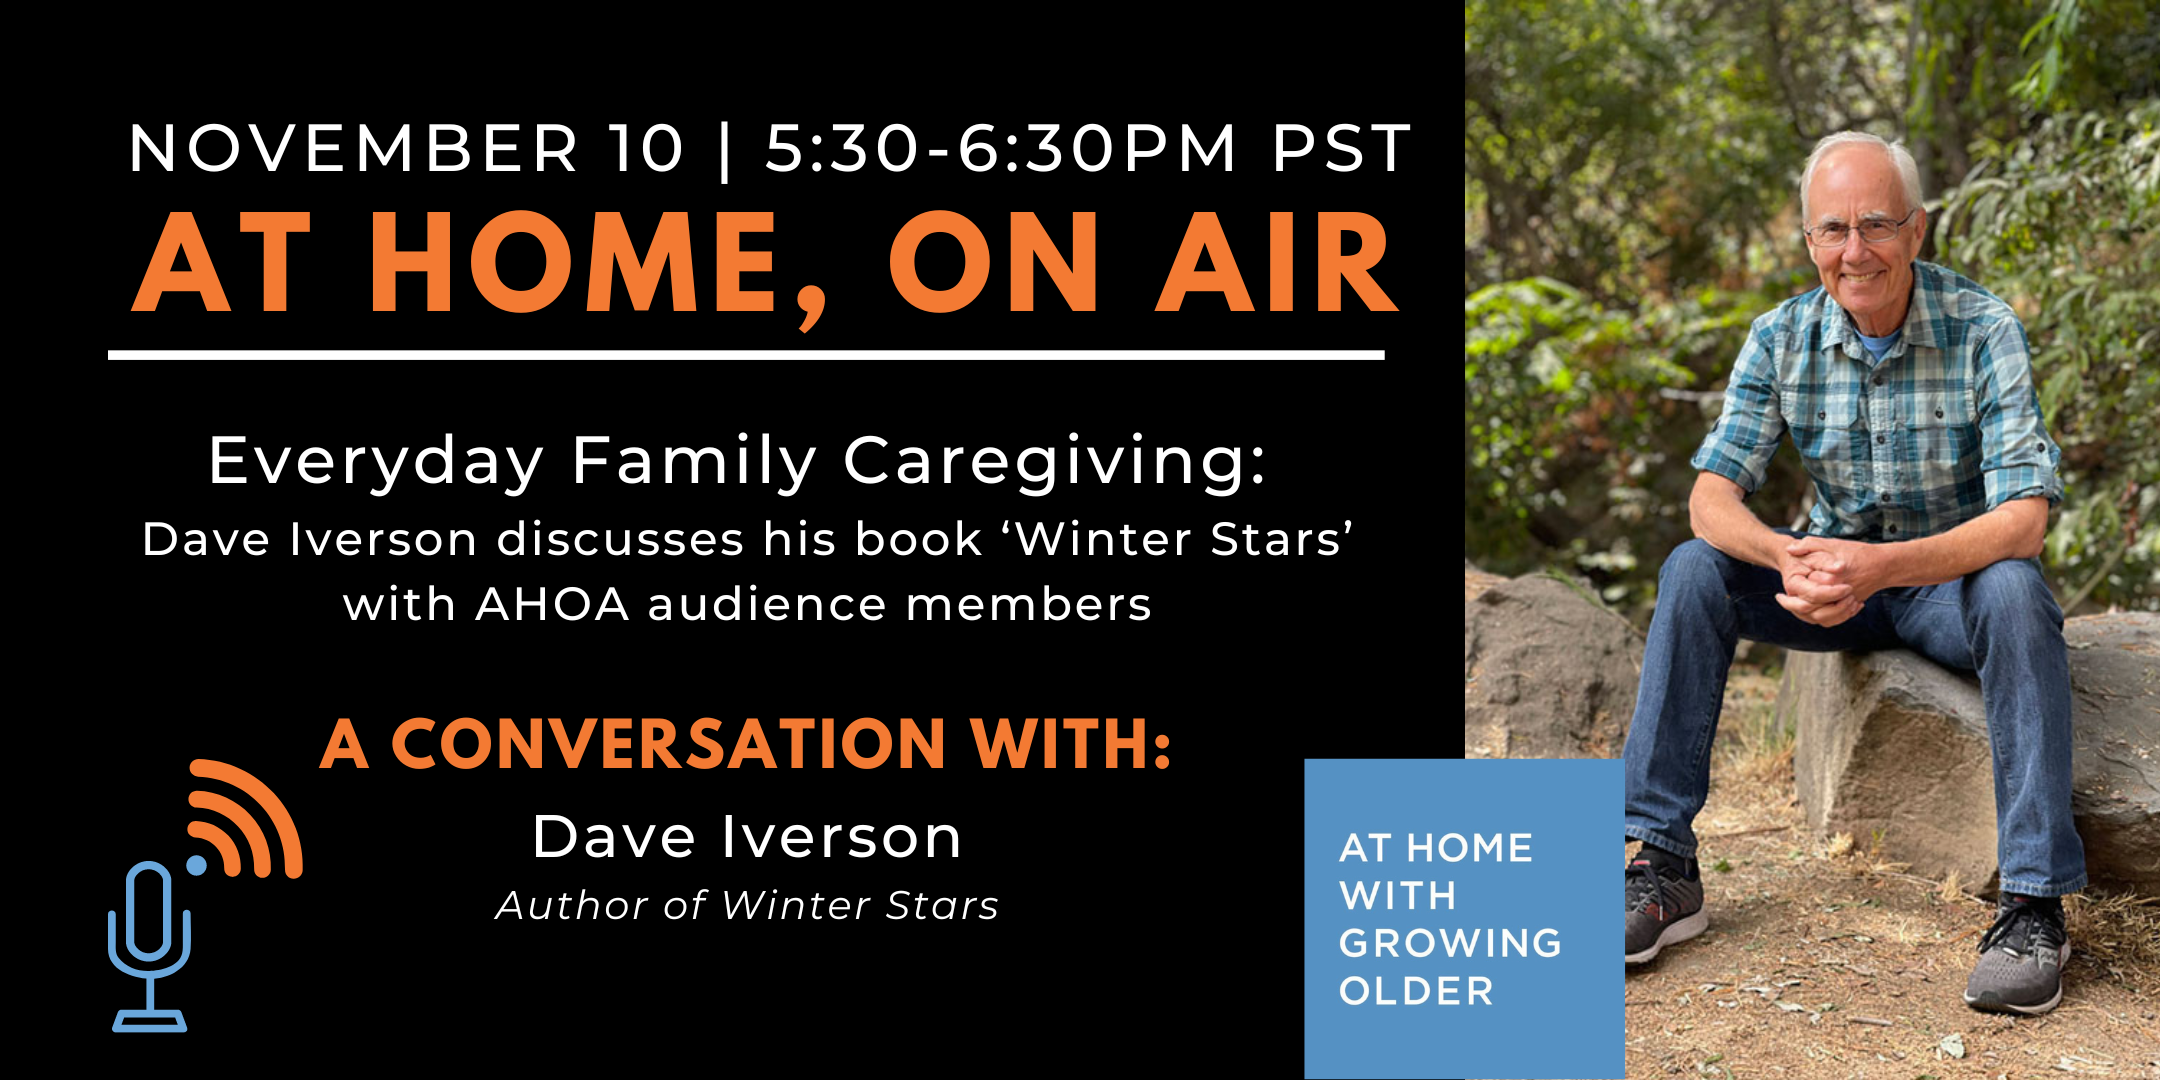 At Home, On Air: A Conversation with Dave Iverson